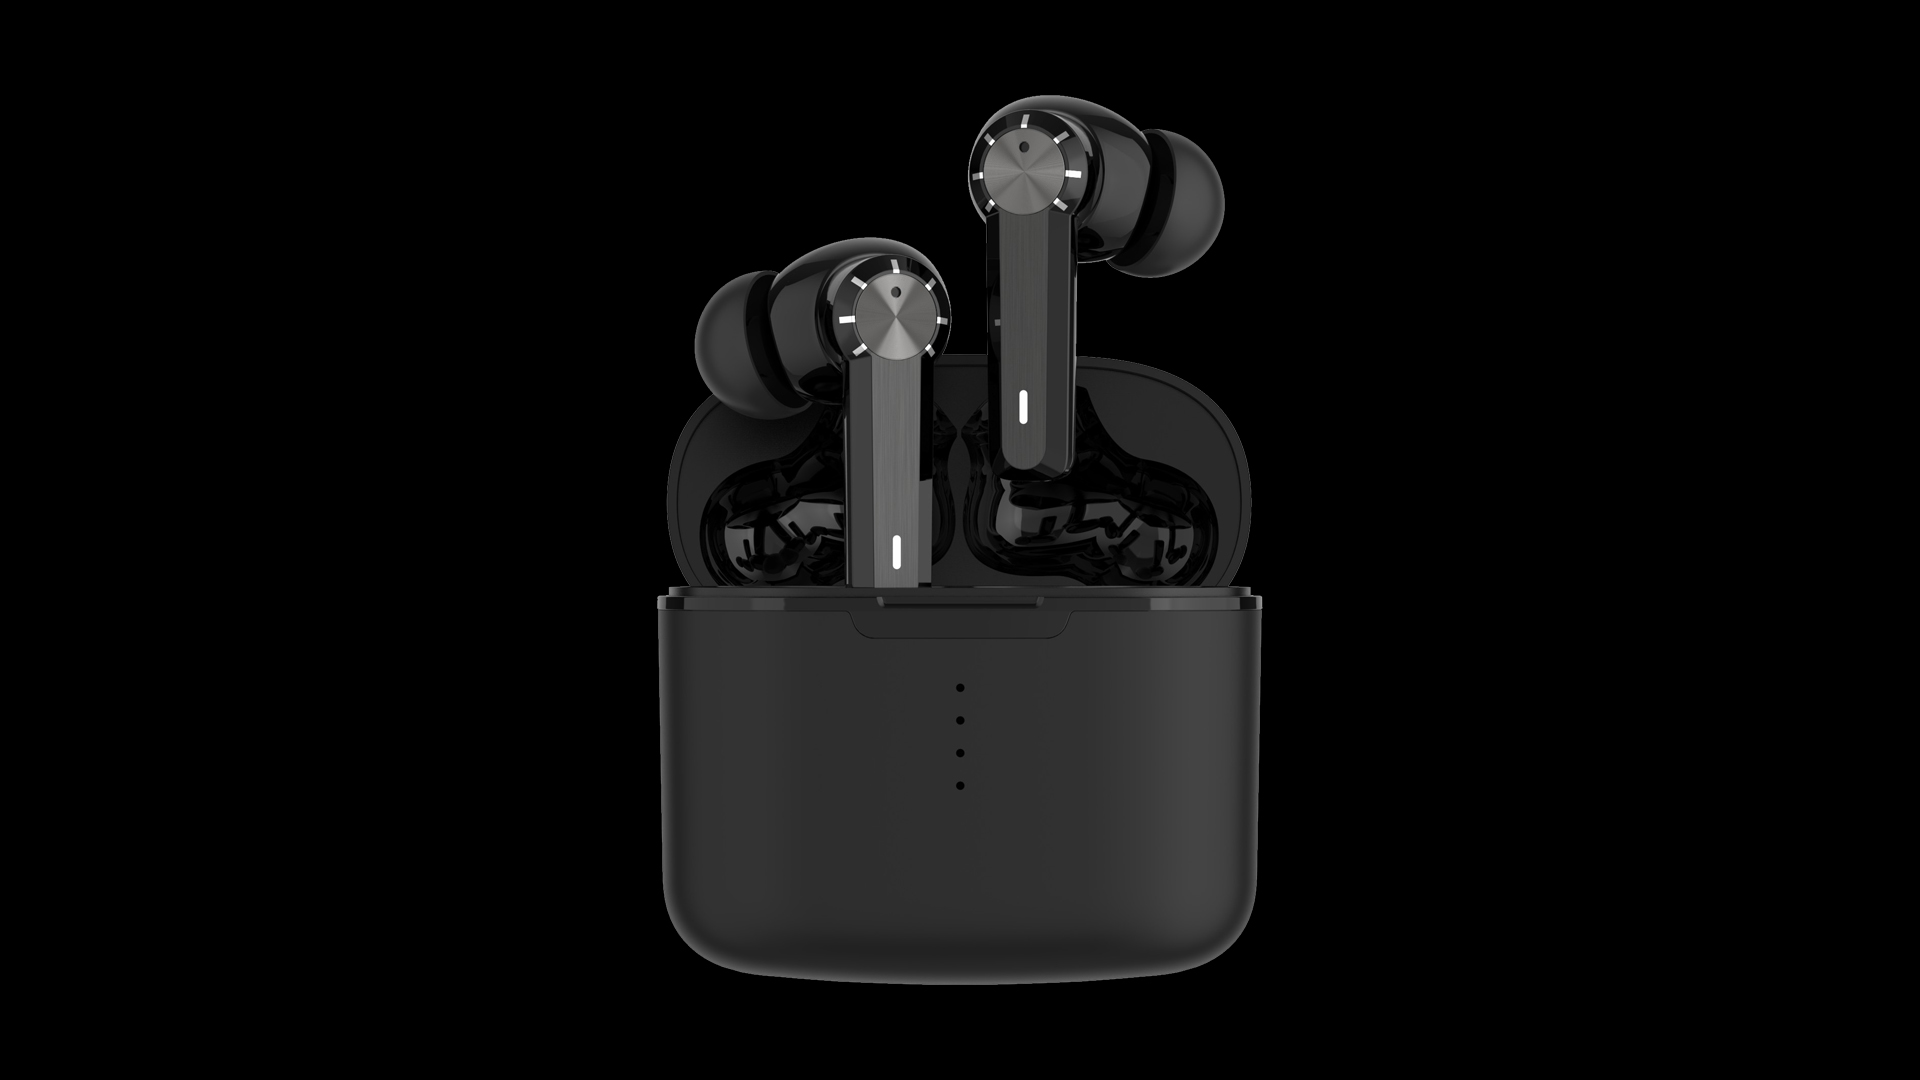 Best wireless earphone ANC earbuds budget headset earplugs am fm Noise canceling headphones for gaming and music tws earbuds earphones